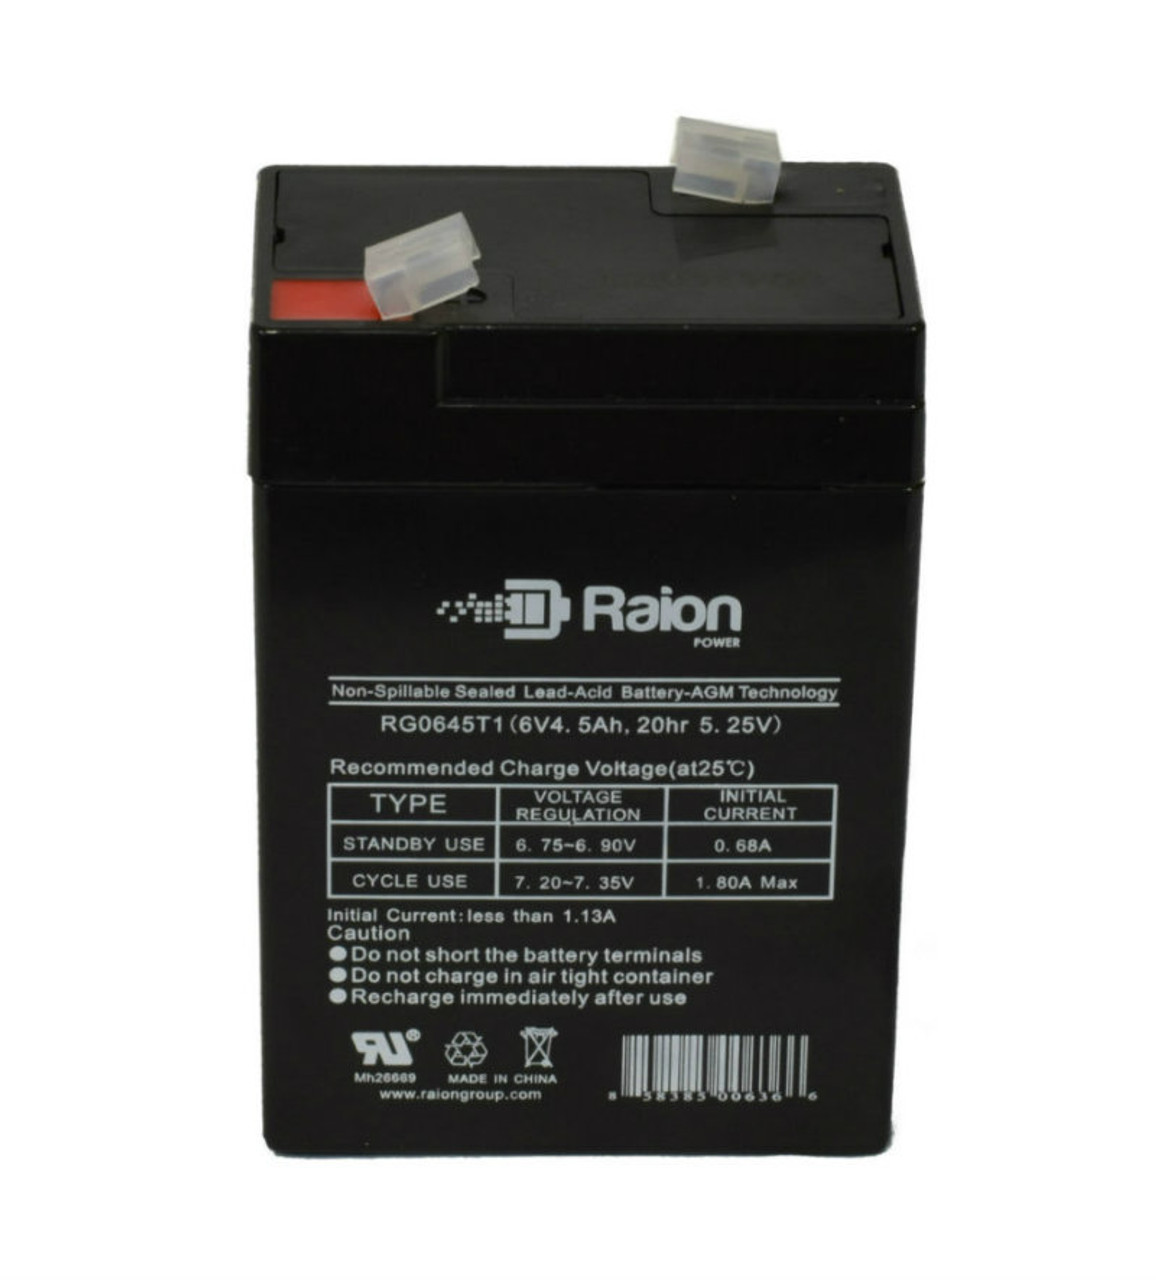 Raion Power RG0645T1 Replacement Battery Cartridge for Philips A-1 BP Monitor - M3923A